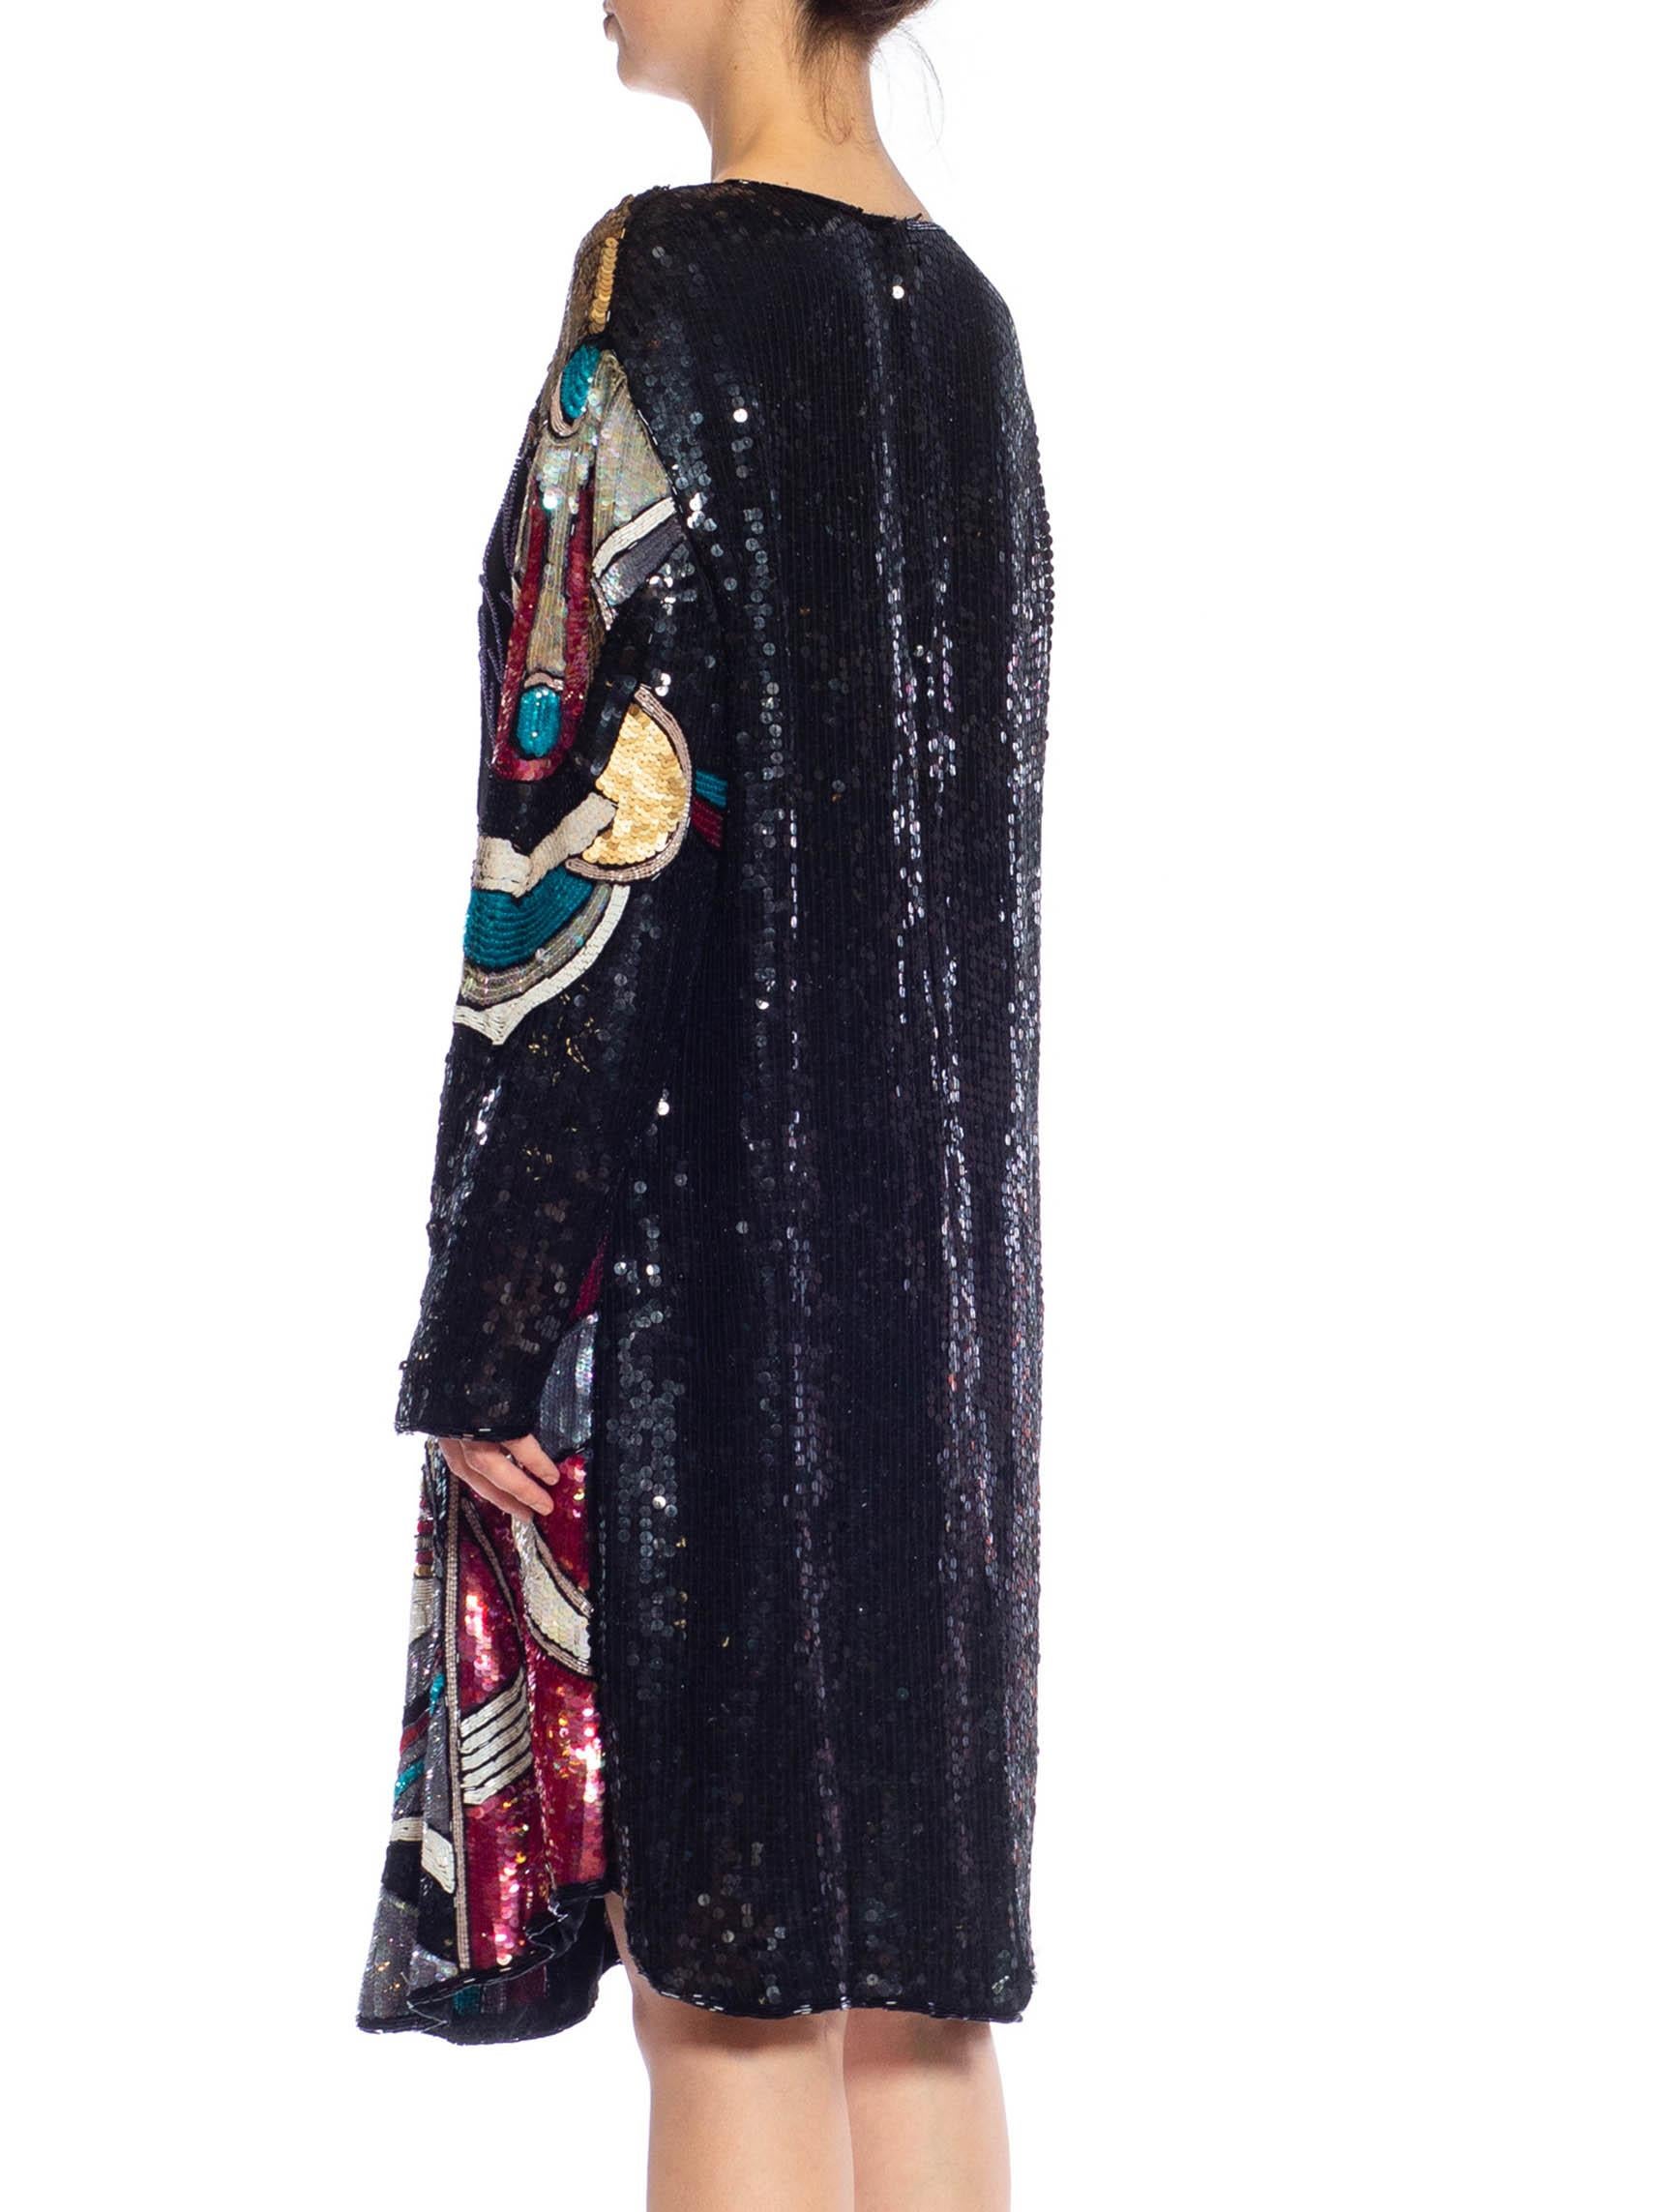 1980S Black & White Multicolored Beaded Silk Abstract Art Cocktail Dress For Sale 5